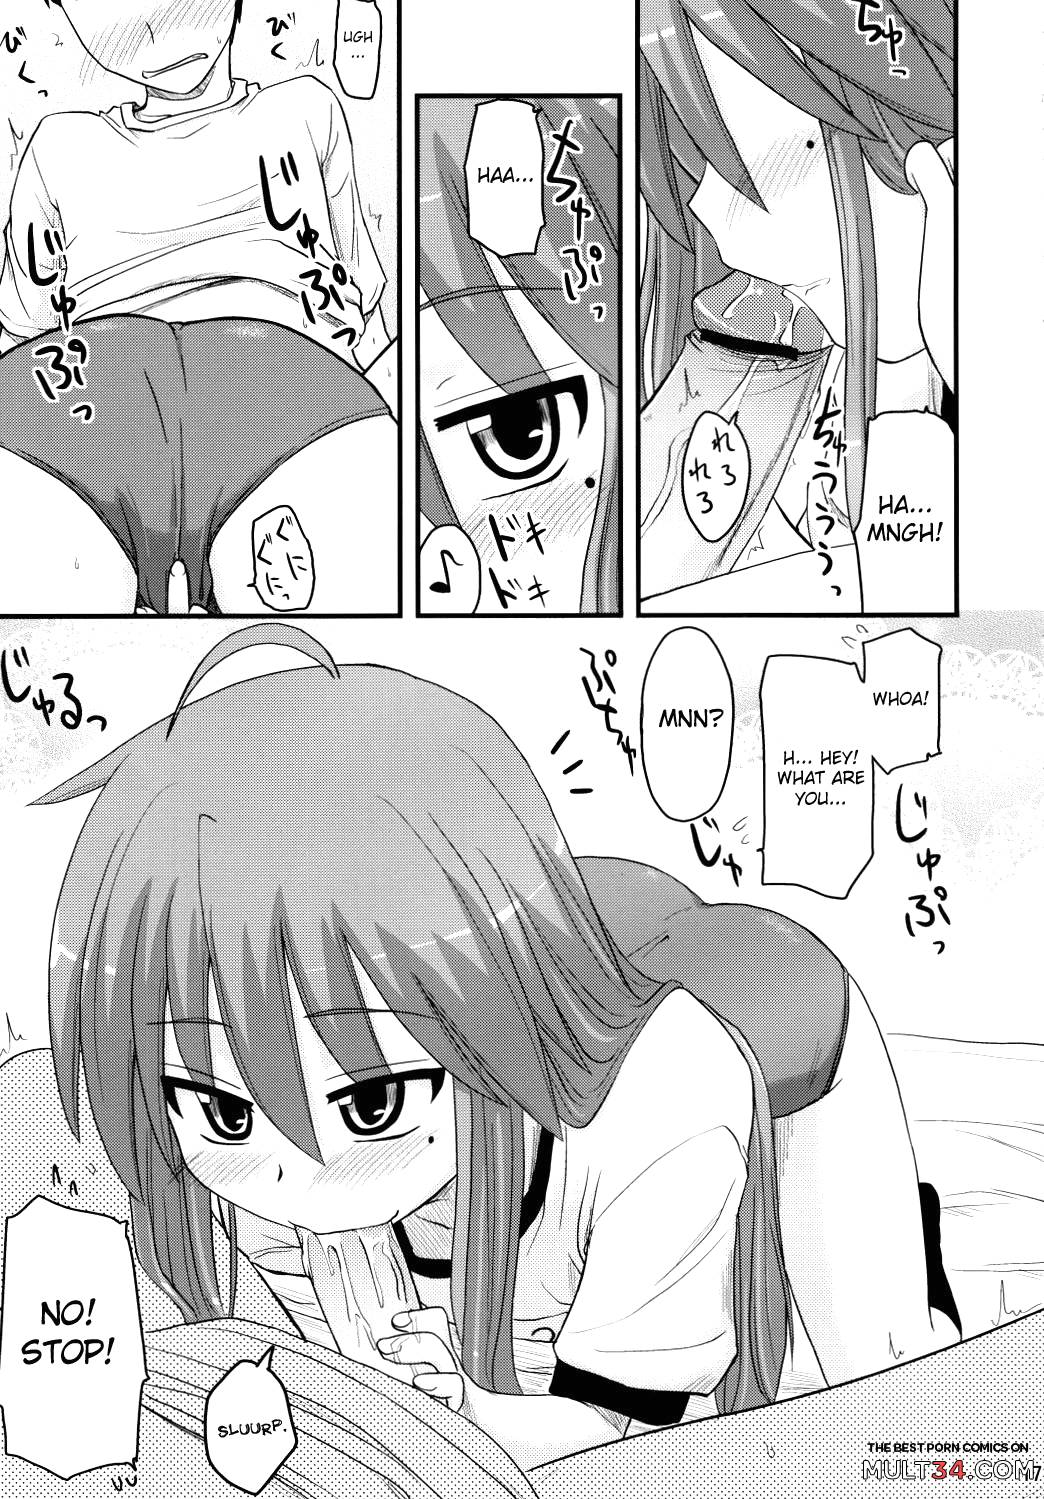 Konata and Oh-zu 4 people each and every one + 1 page 13